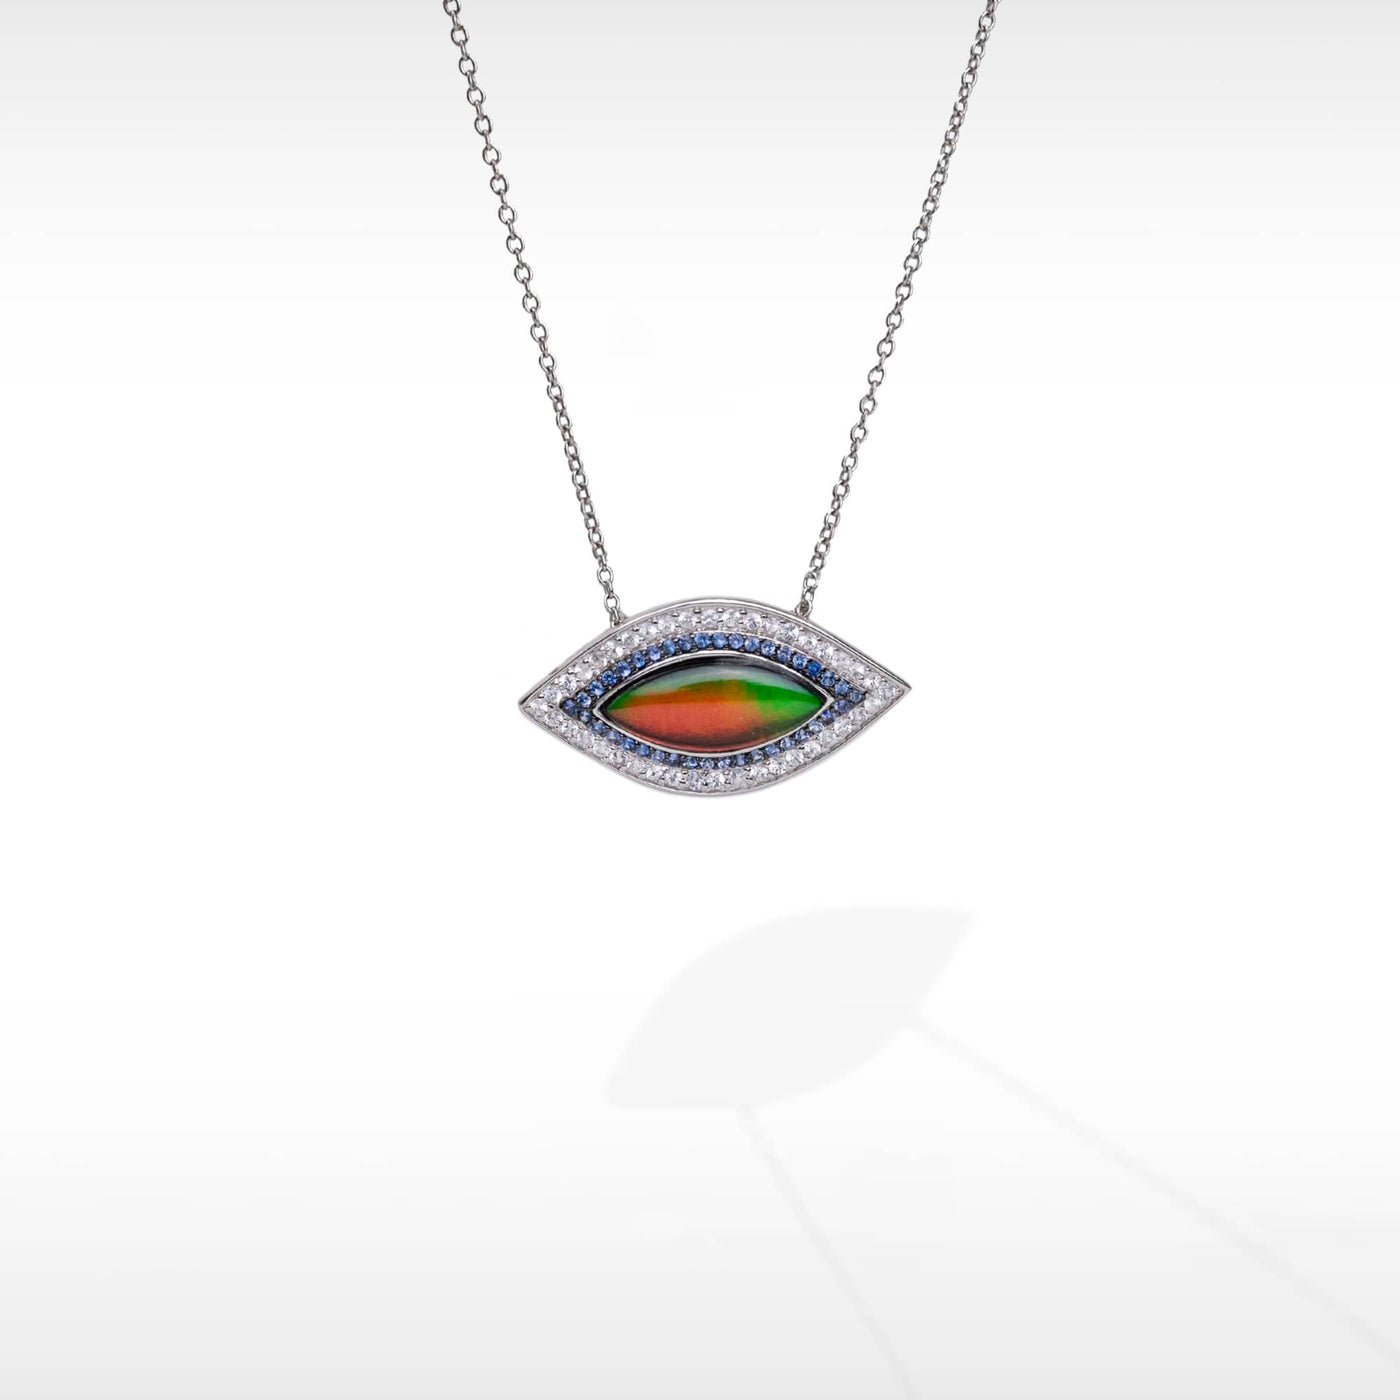 Women's Sterling Silver Ammolite Pendant with White and Blue Sapphire Accent